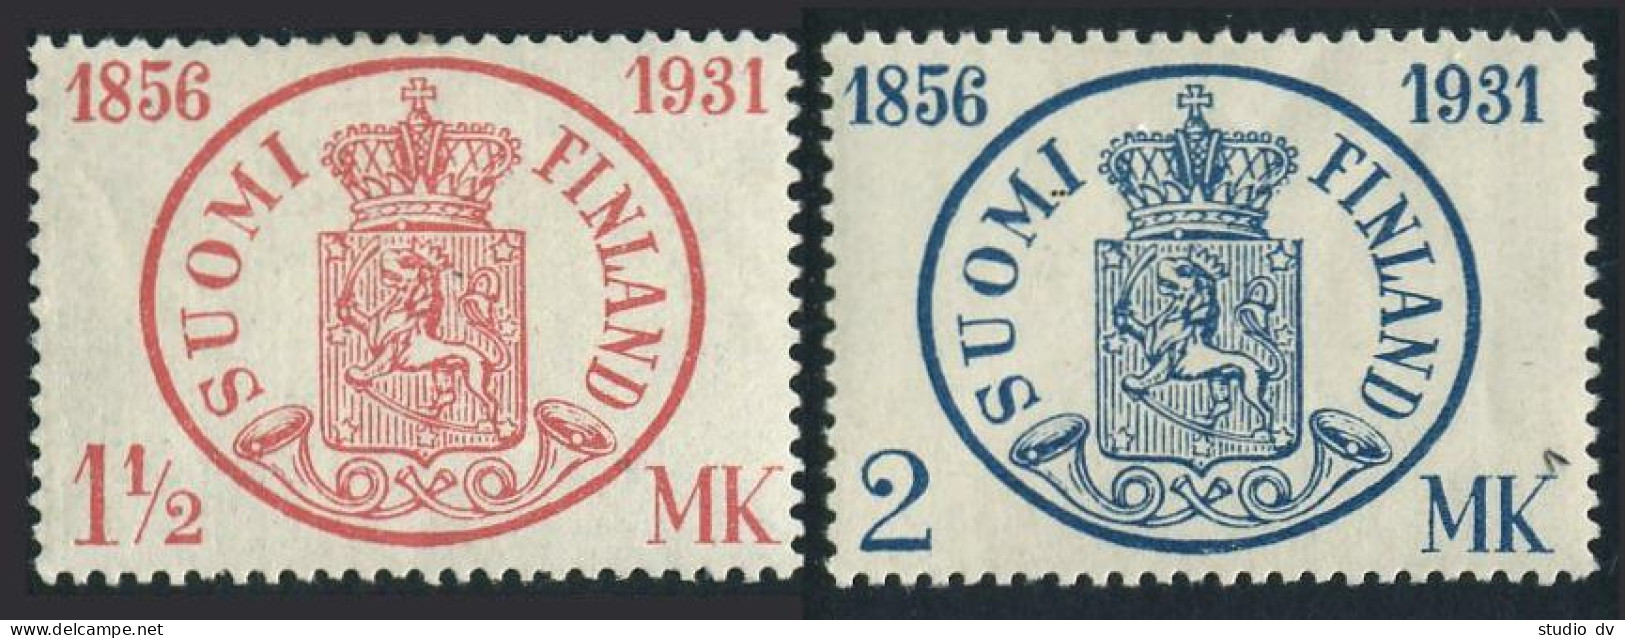 Finland 182-183,hinged. Mi 167-168. 1st Use Of Postage Stamps In Finland,75,1931 - Ongebruikt